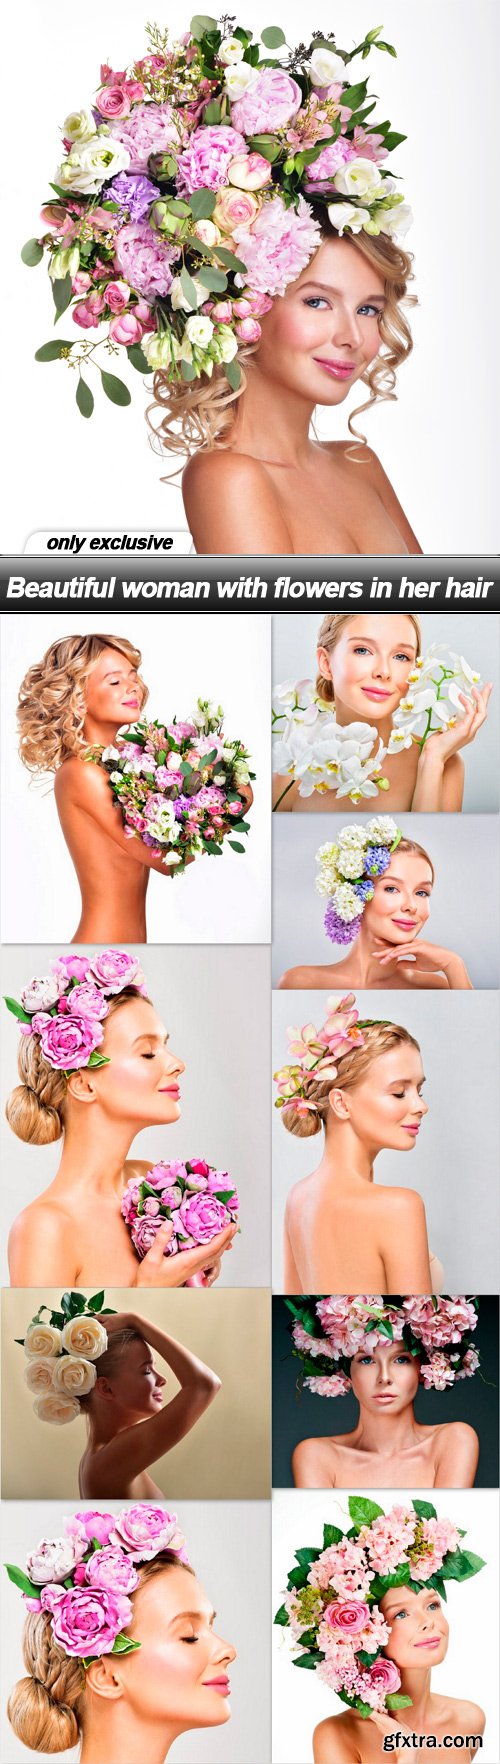 Beautiful woman with flowers in her hair - 10 UHQ JPEG